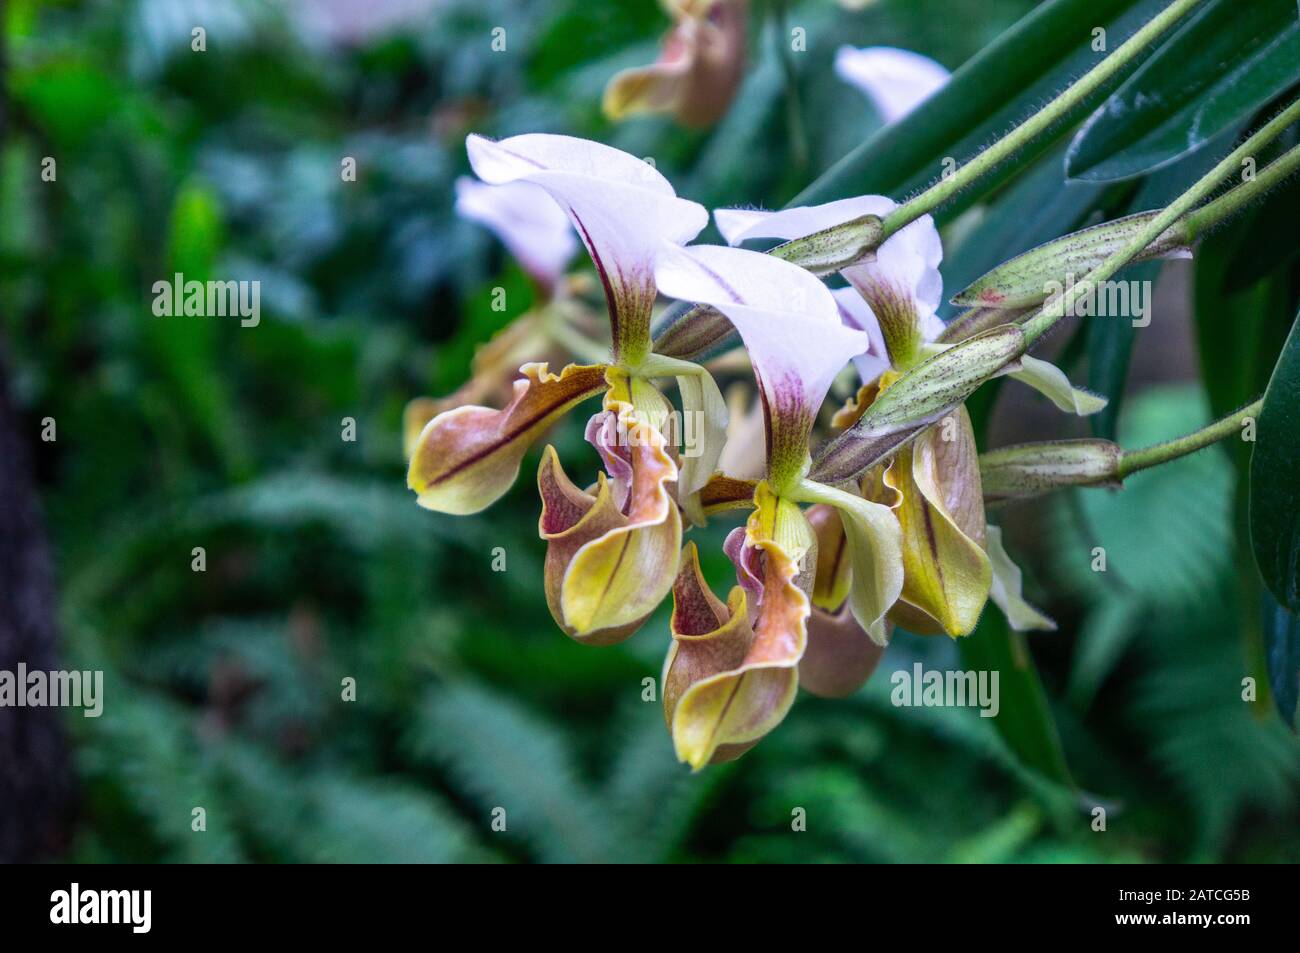 Close up of group of yellow and purple Venus slipper orchids in macro. Cool green blurred tropical background shot in natural light Stock Photo